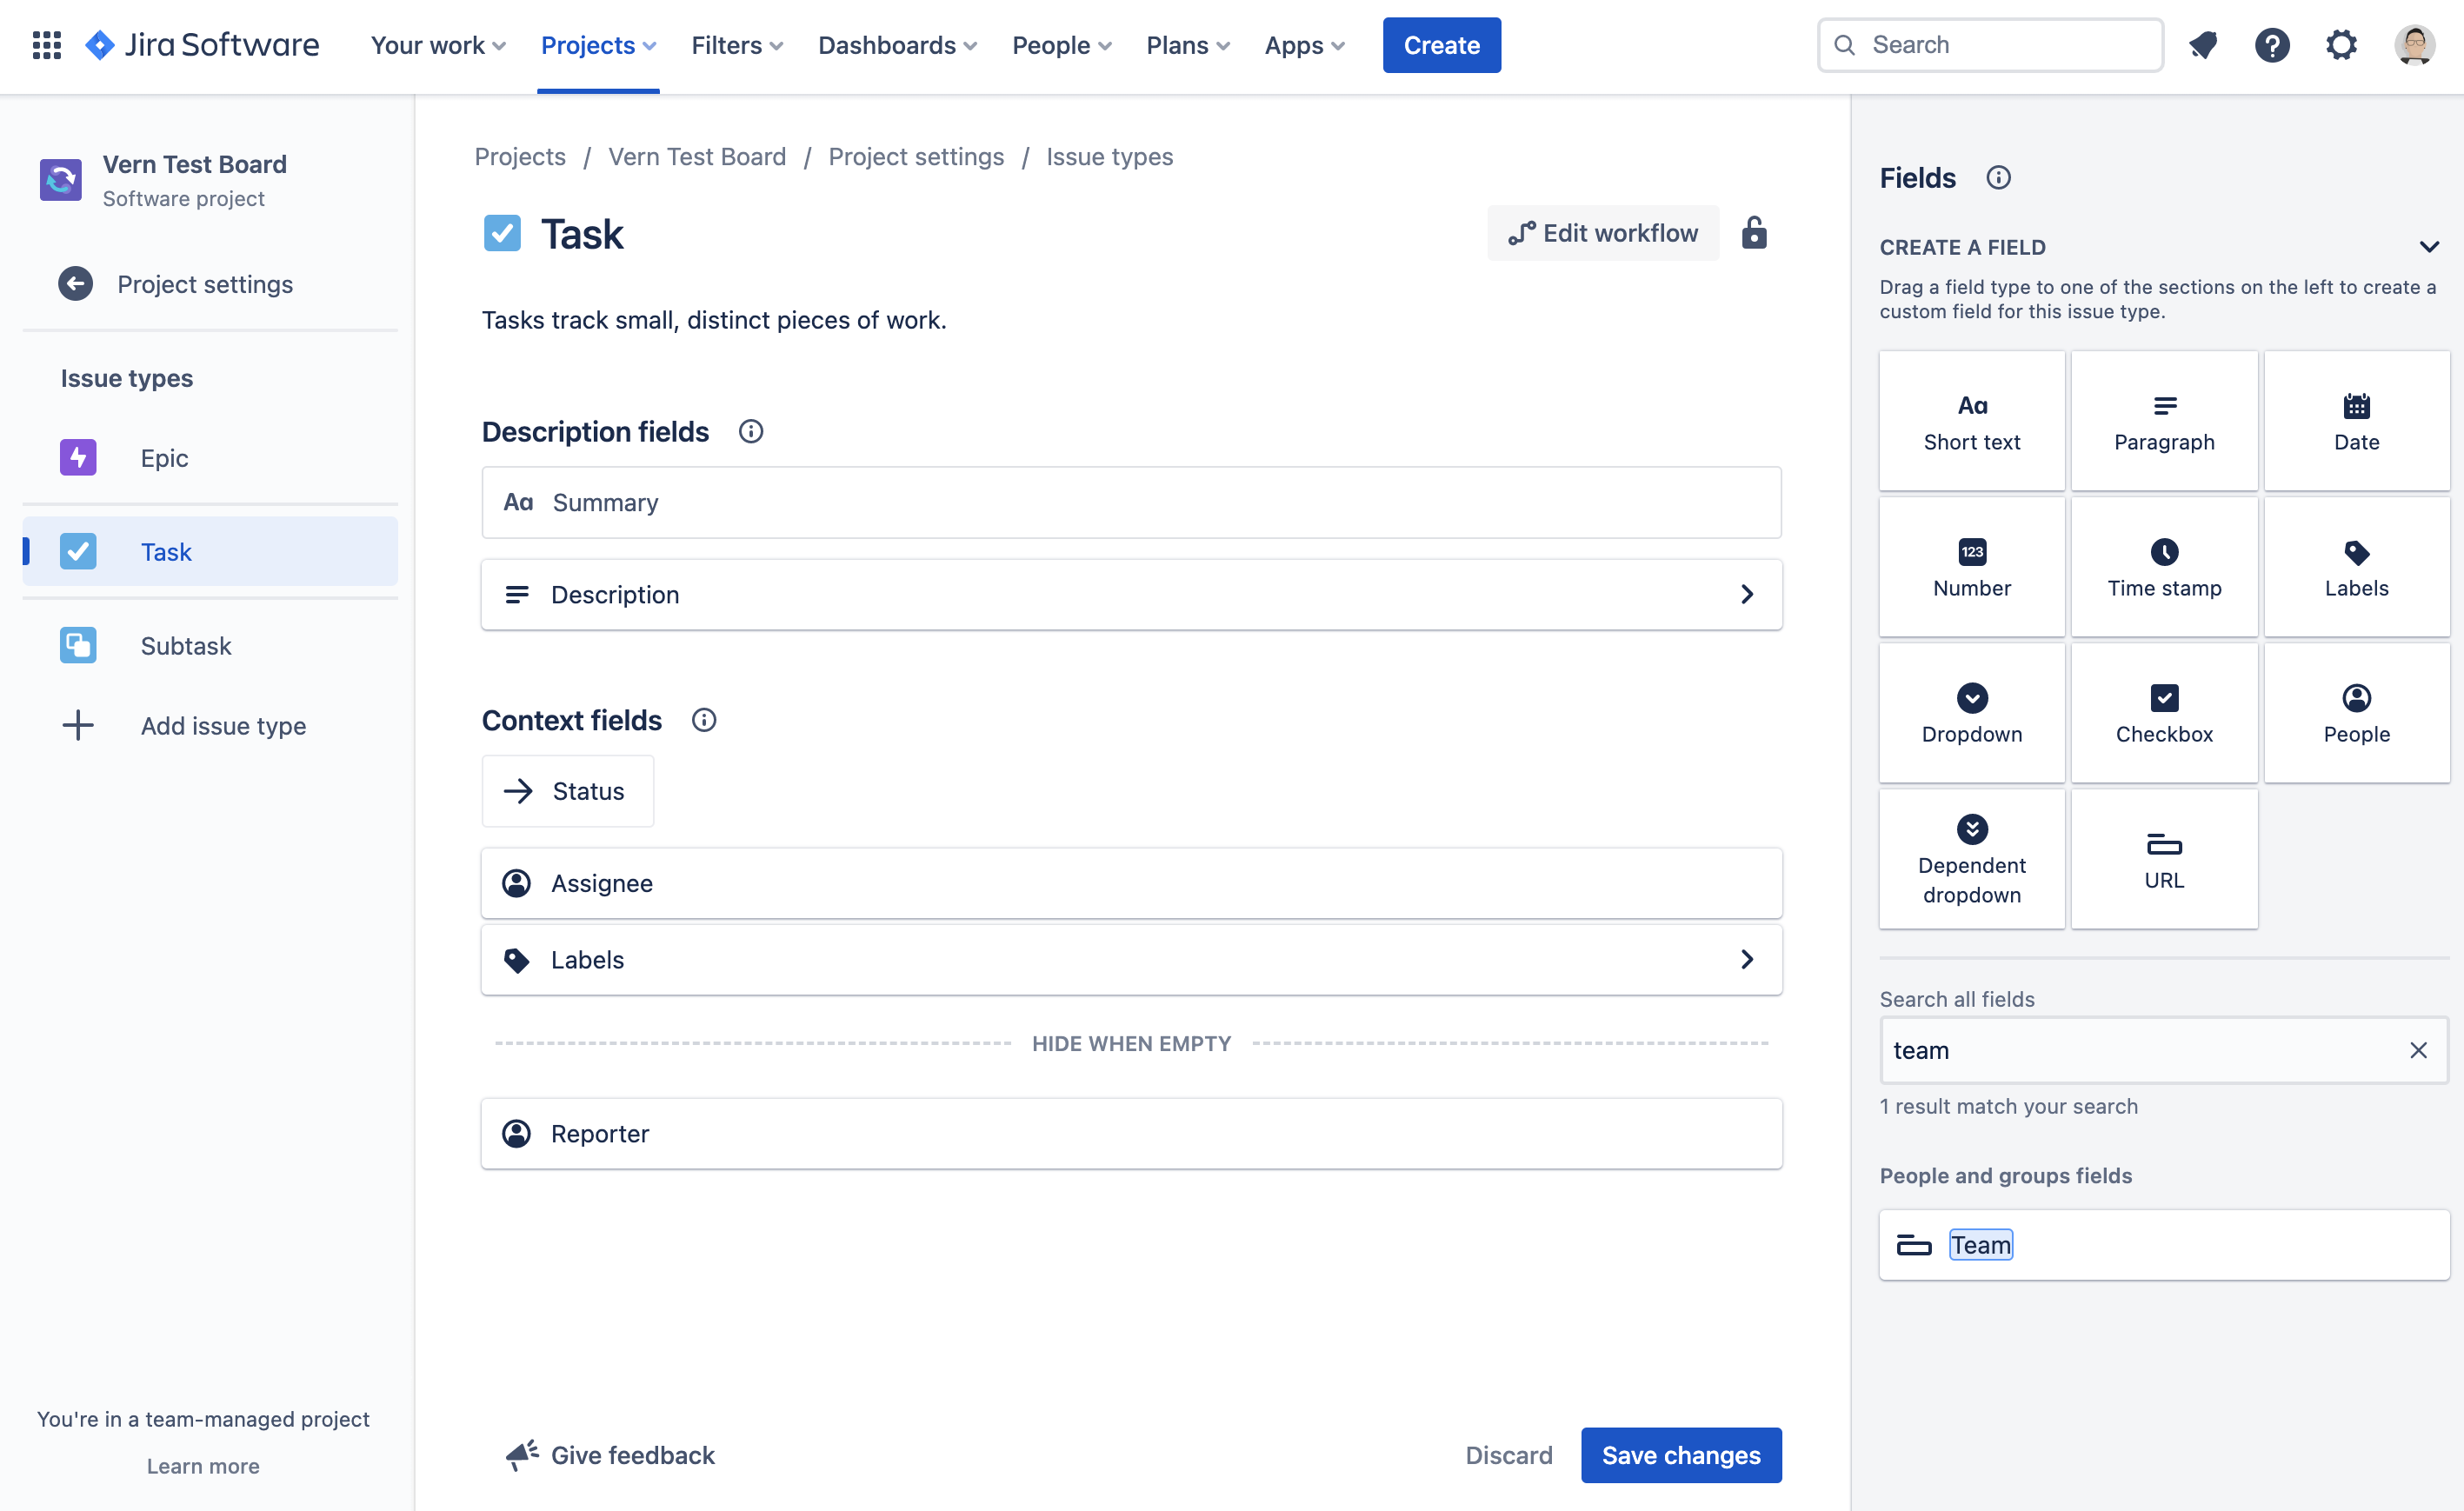 The Issue Types page in a team-managed project's settings in Jira.